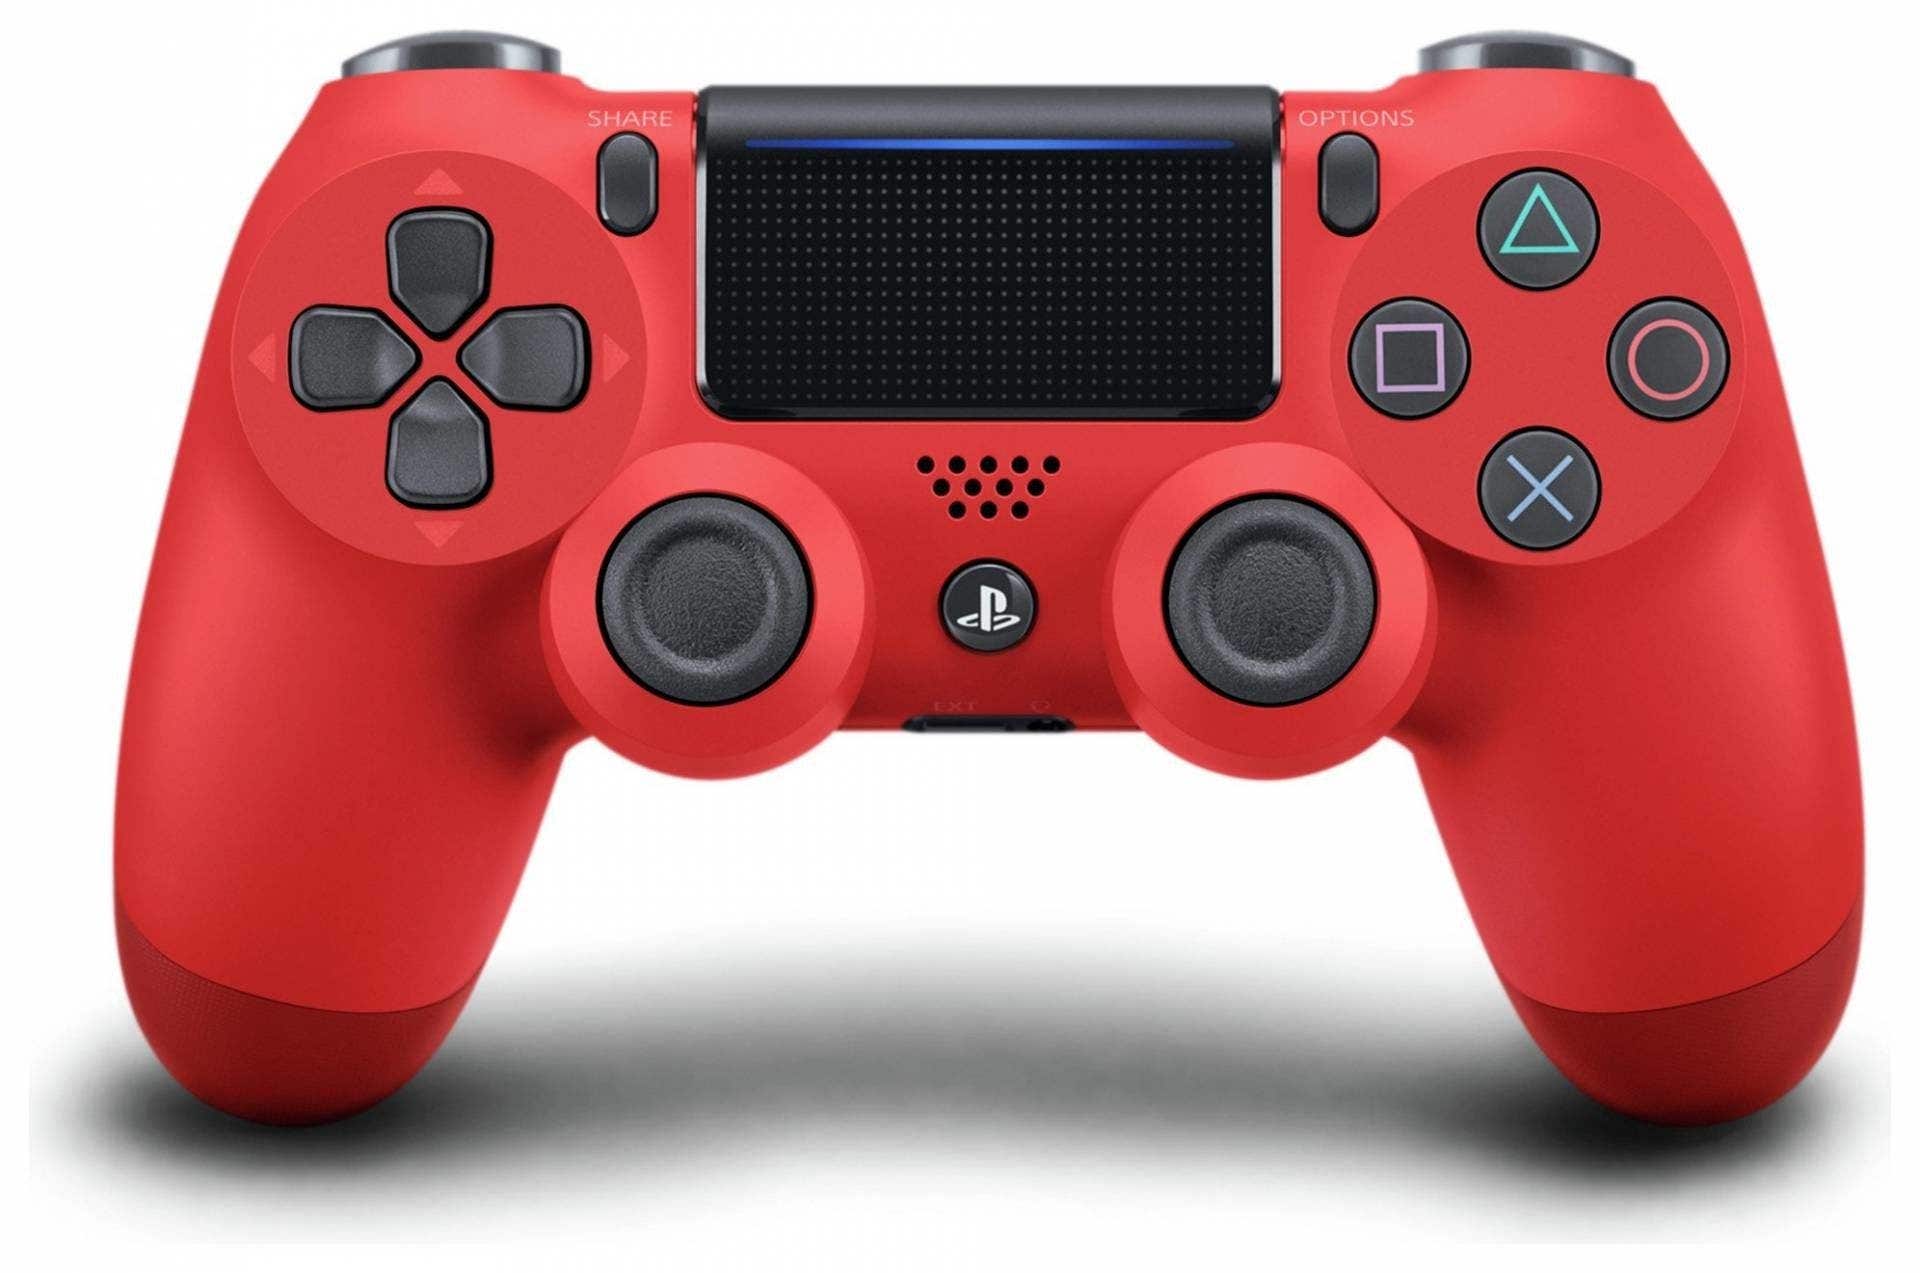 Sony PS4 DualShock 4 Wireless Controller, Red